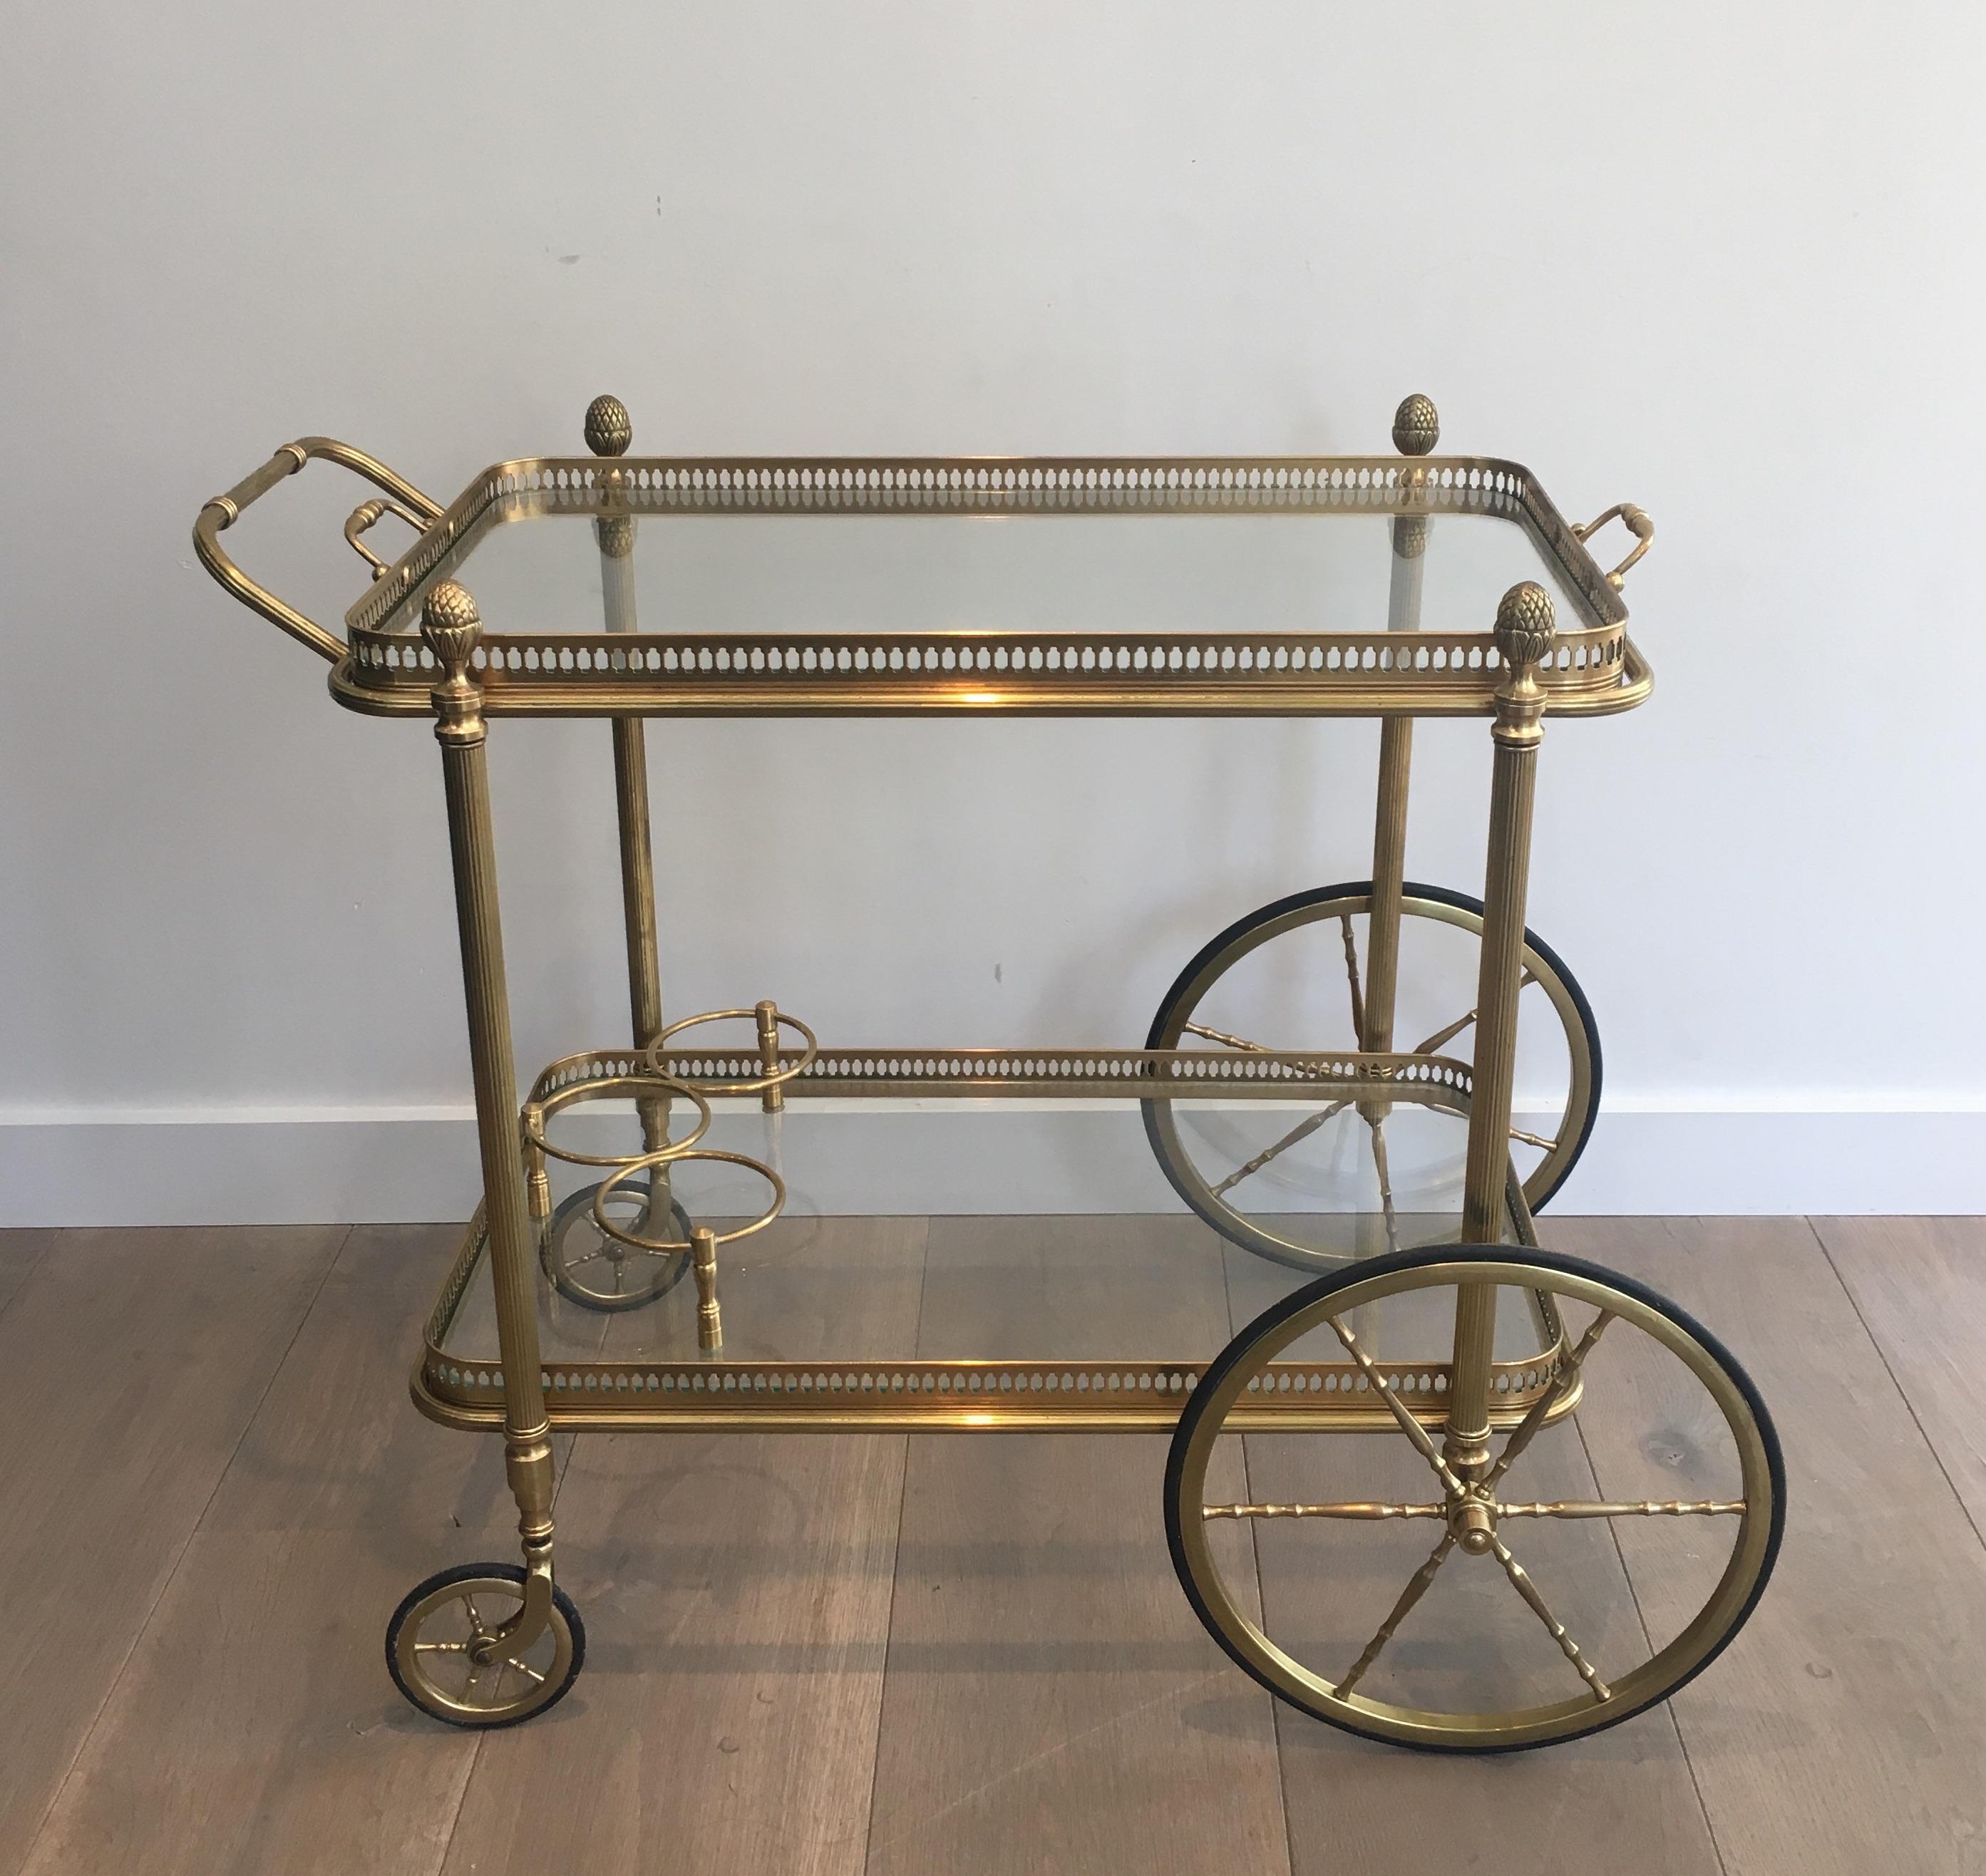 This neoclassical bar cart is made of brass with clear glass removable trays surrounded by a brass gallery. This drinks trolley is attributed to famous french designer Maison Bagués, circa 1940